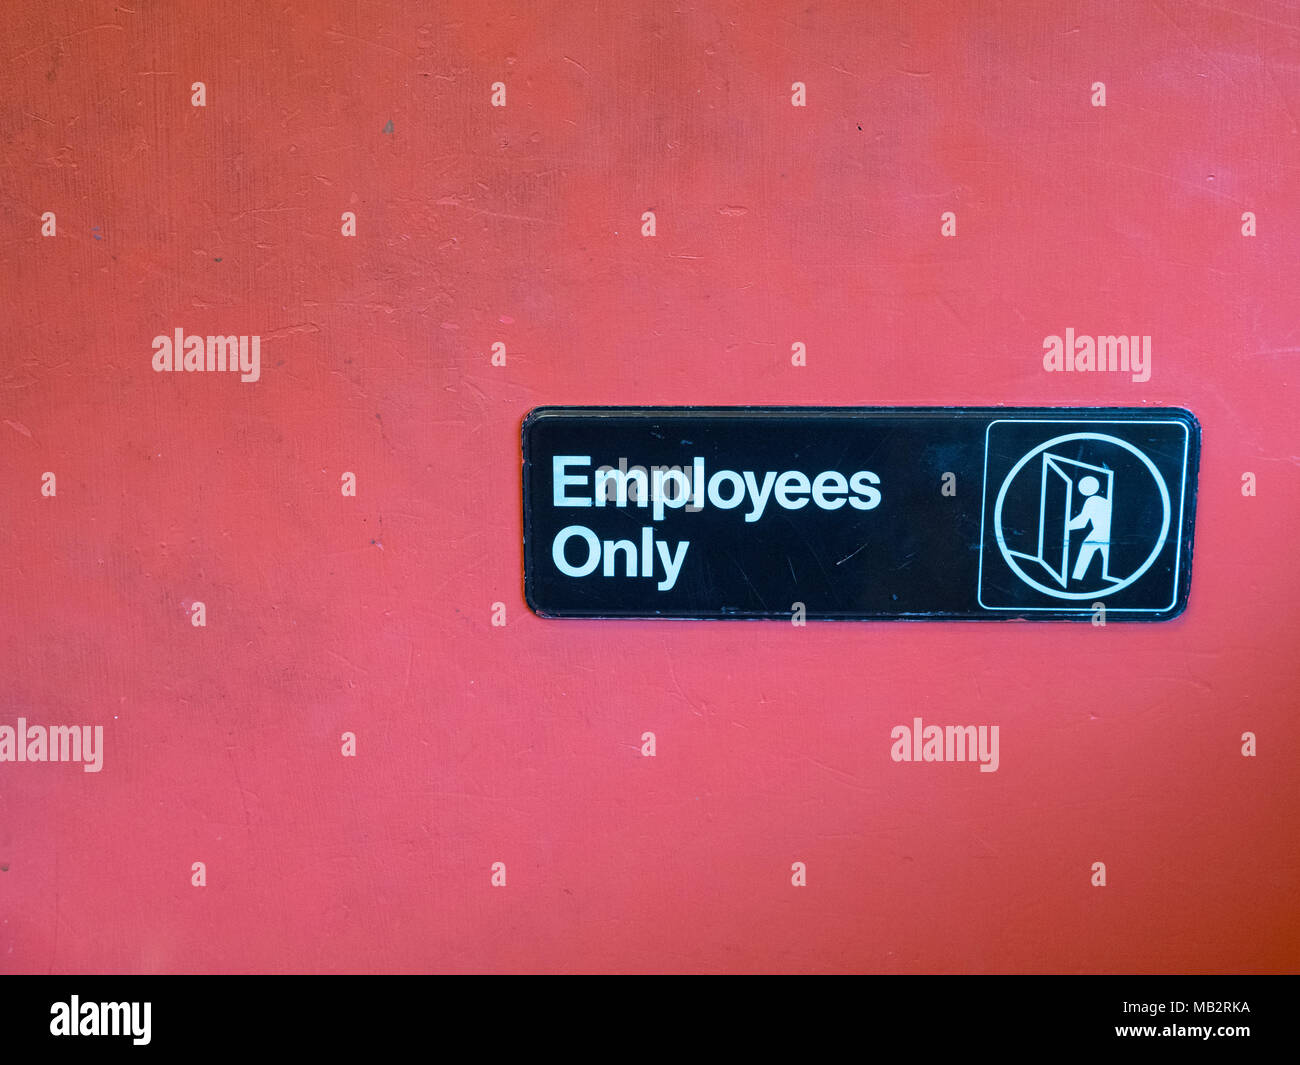 Employees only sign with space to left Stock Photo